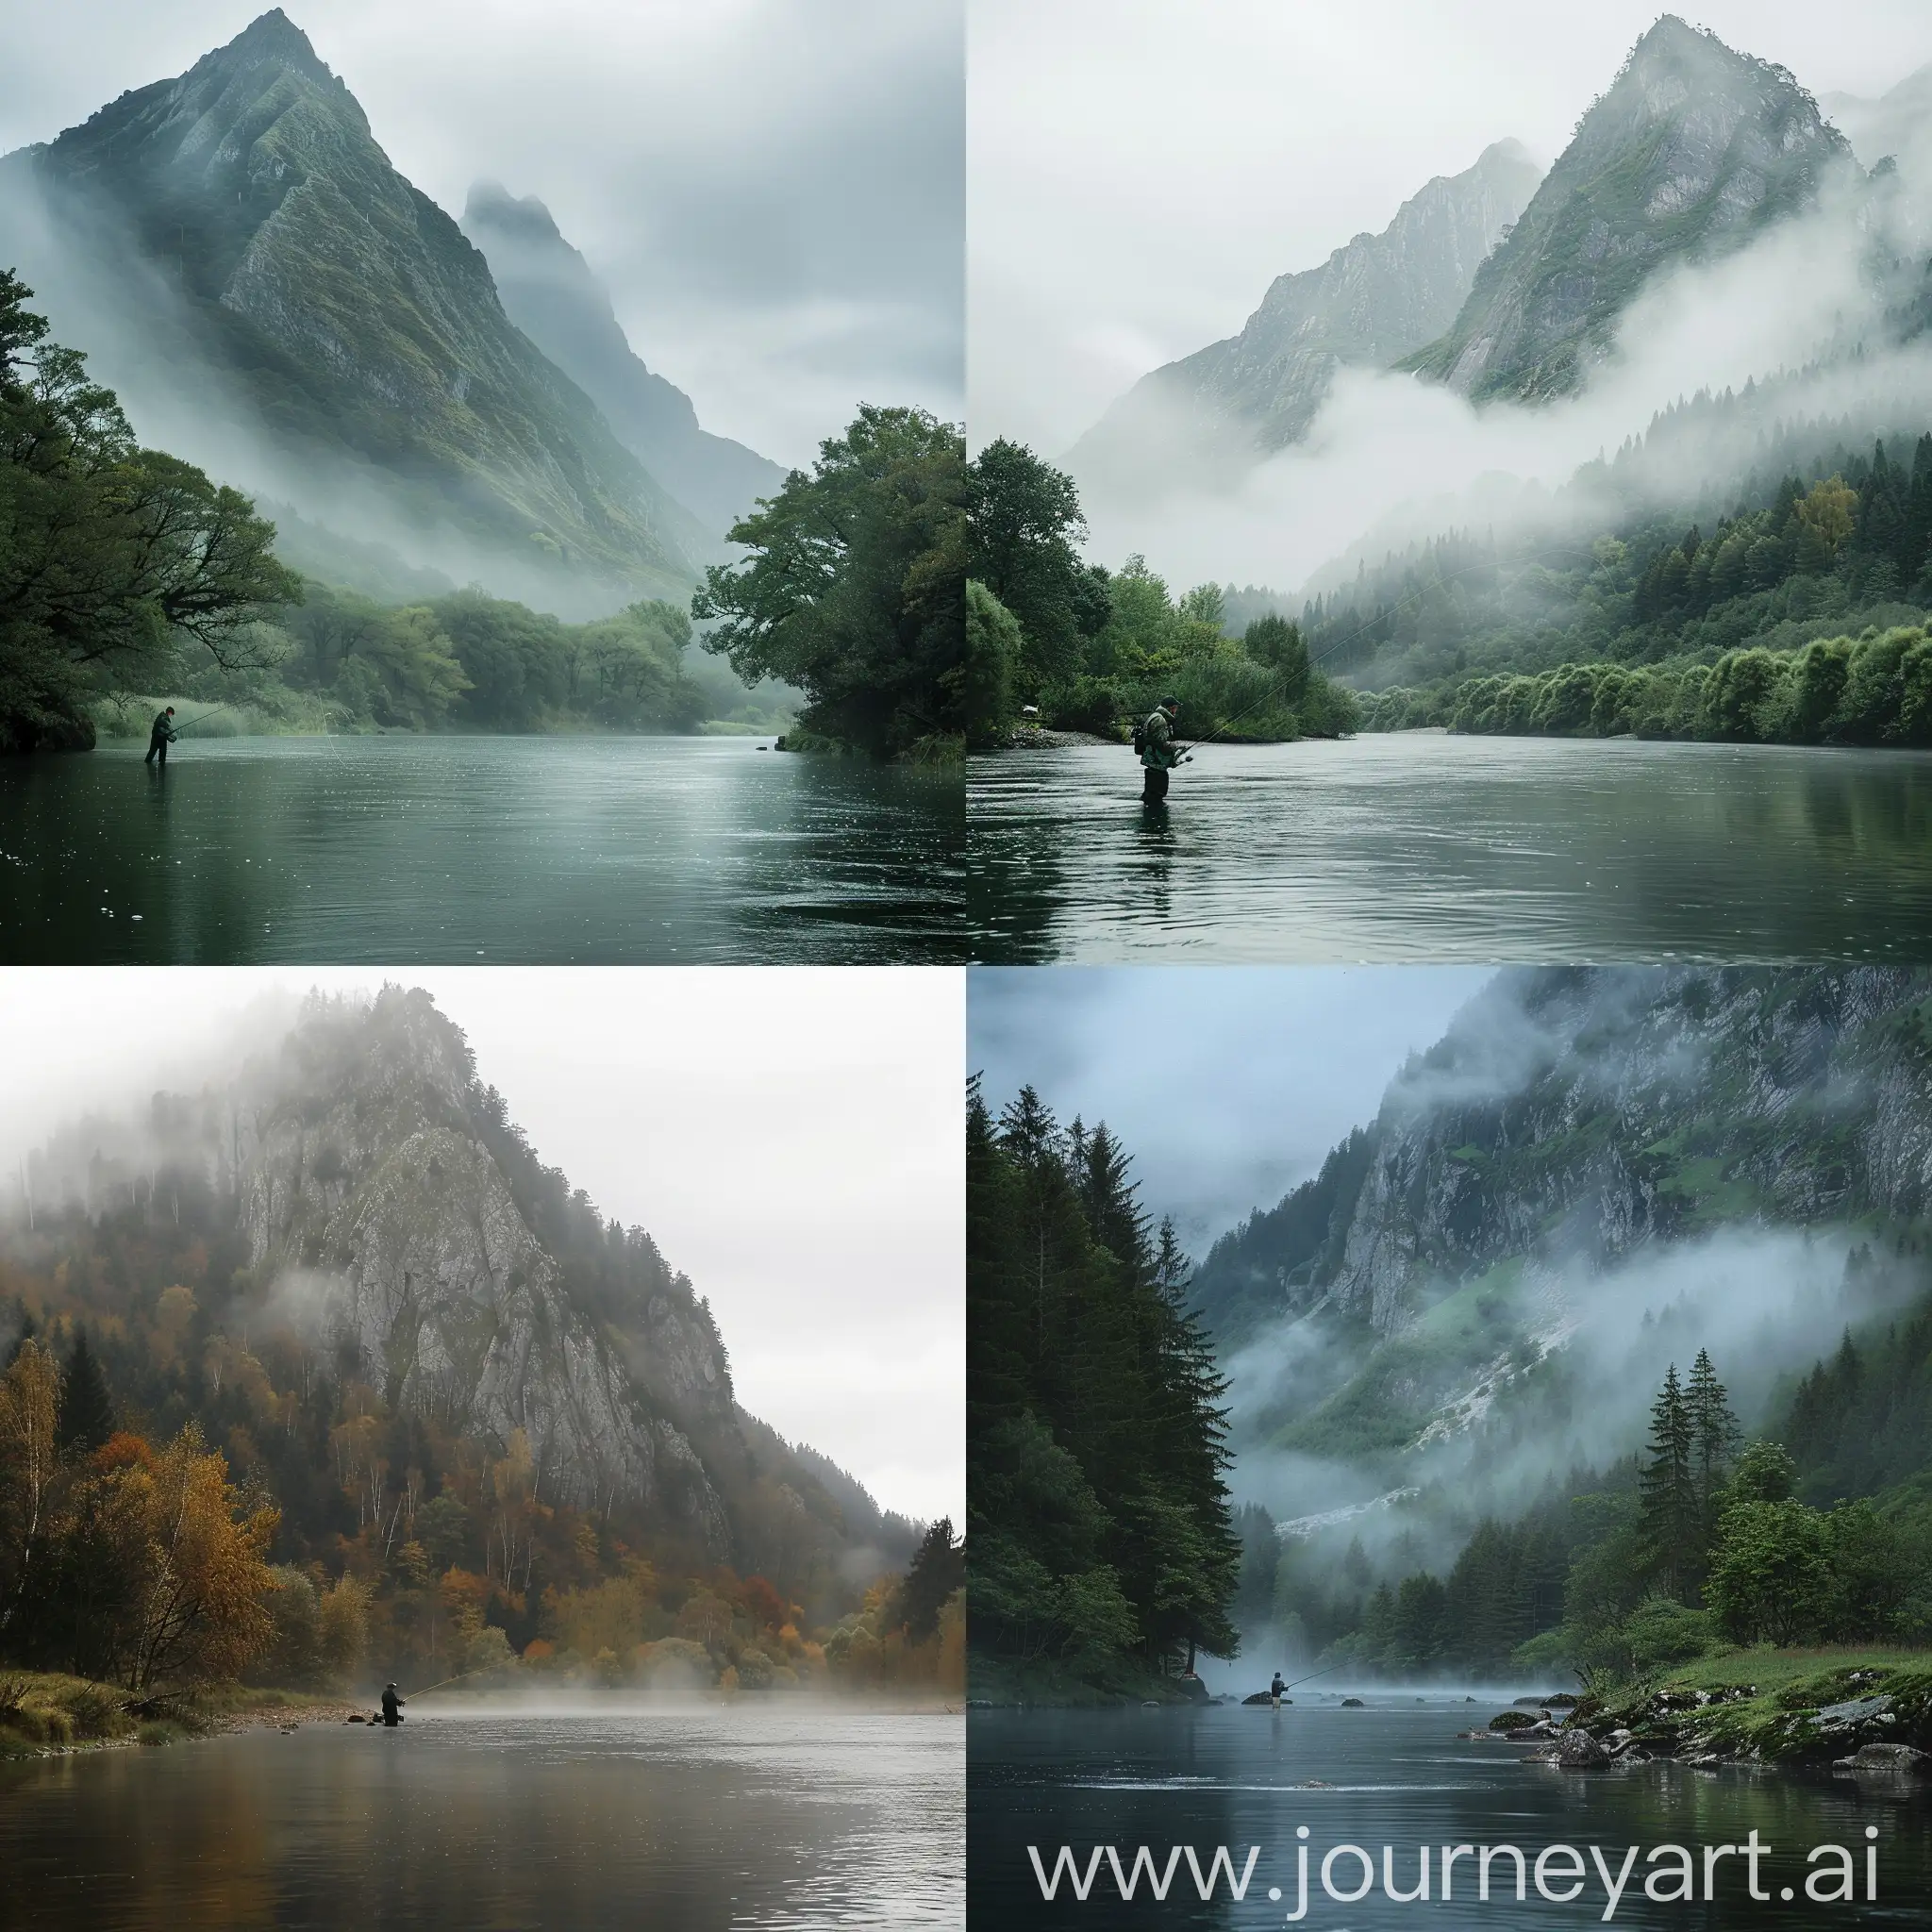 Fisherman-in-a-Serene-Misty-Landscape-with-Mountain-and-River